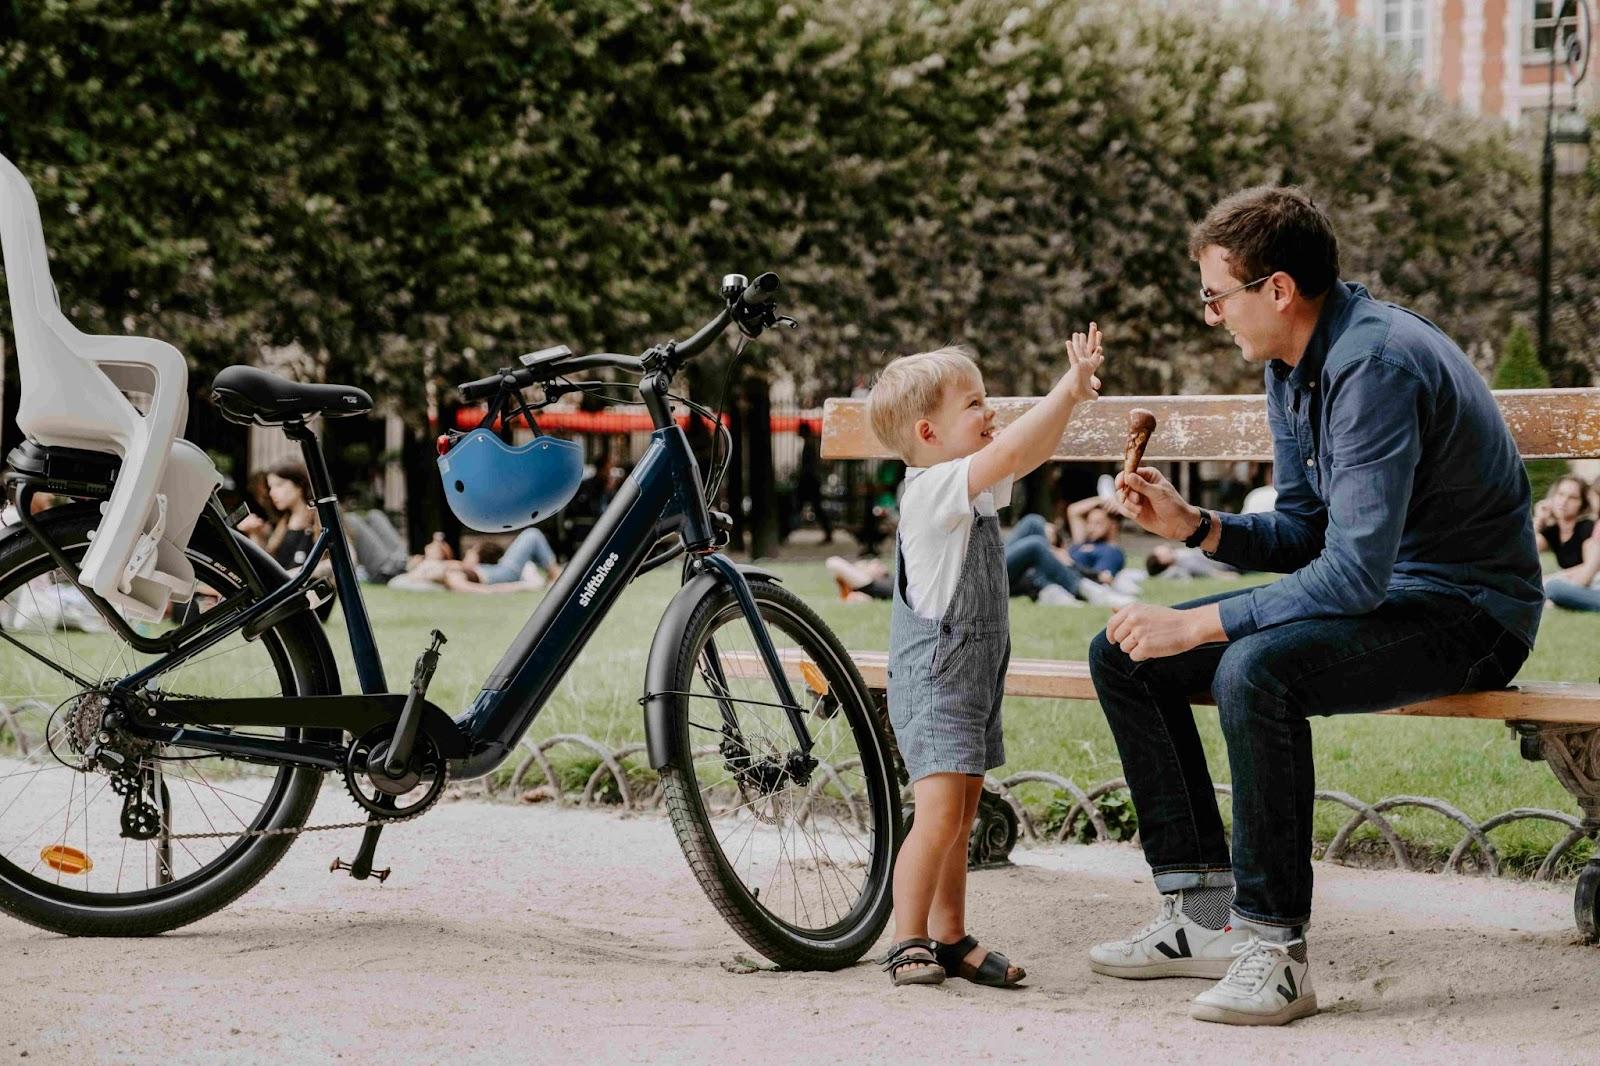 A family on electric bikes taking a break in a park in Paris